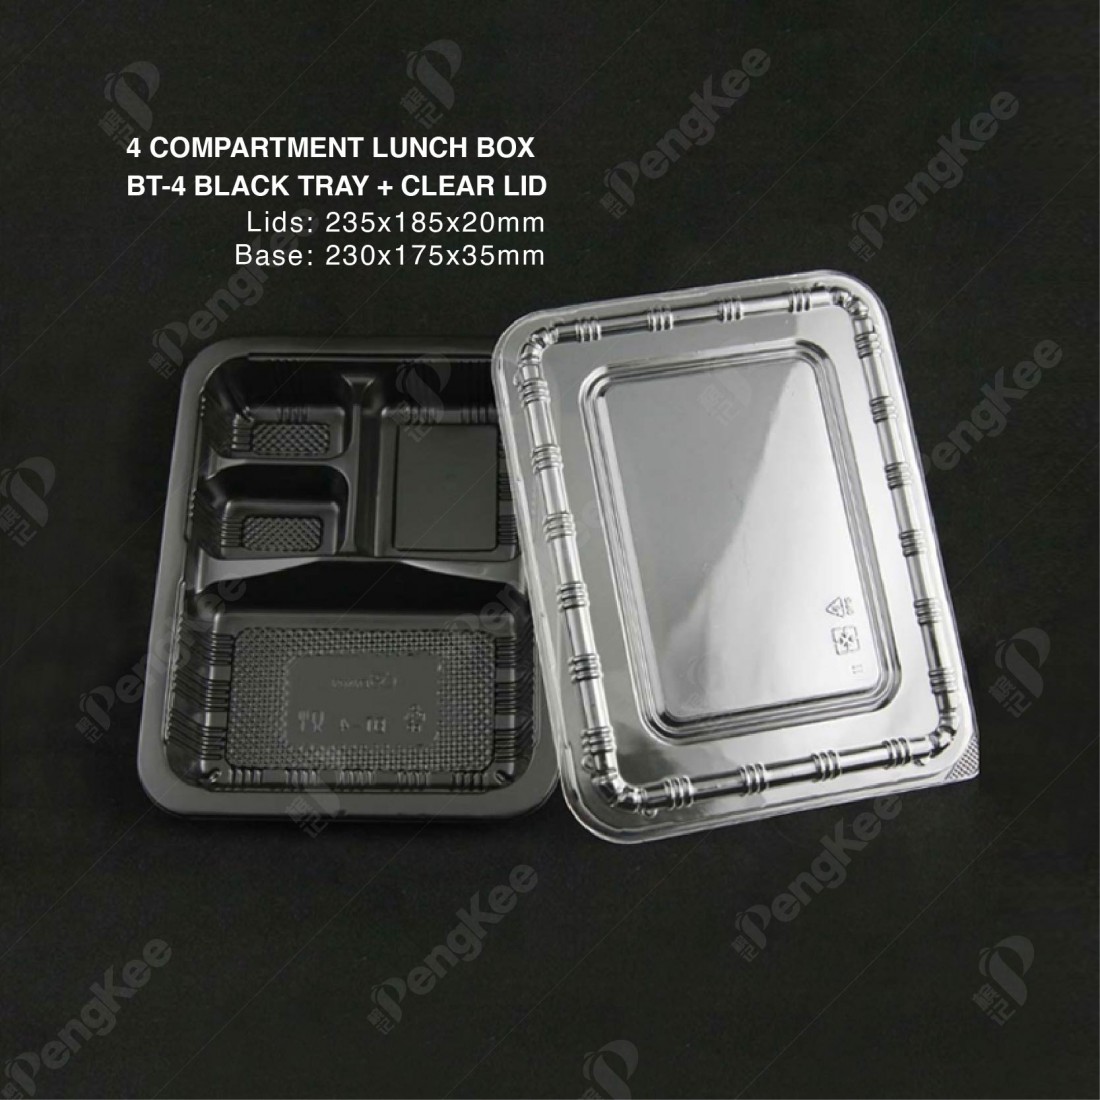 BT-4 LID (CLEAR) + TRAY (4 COMP.)